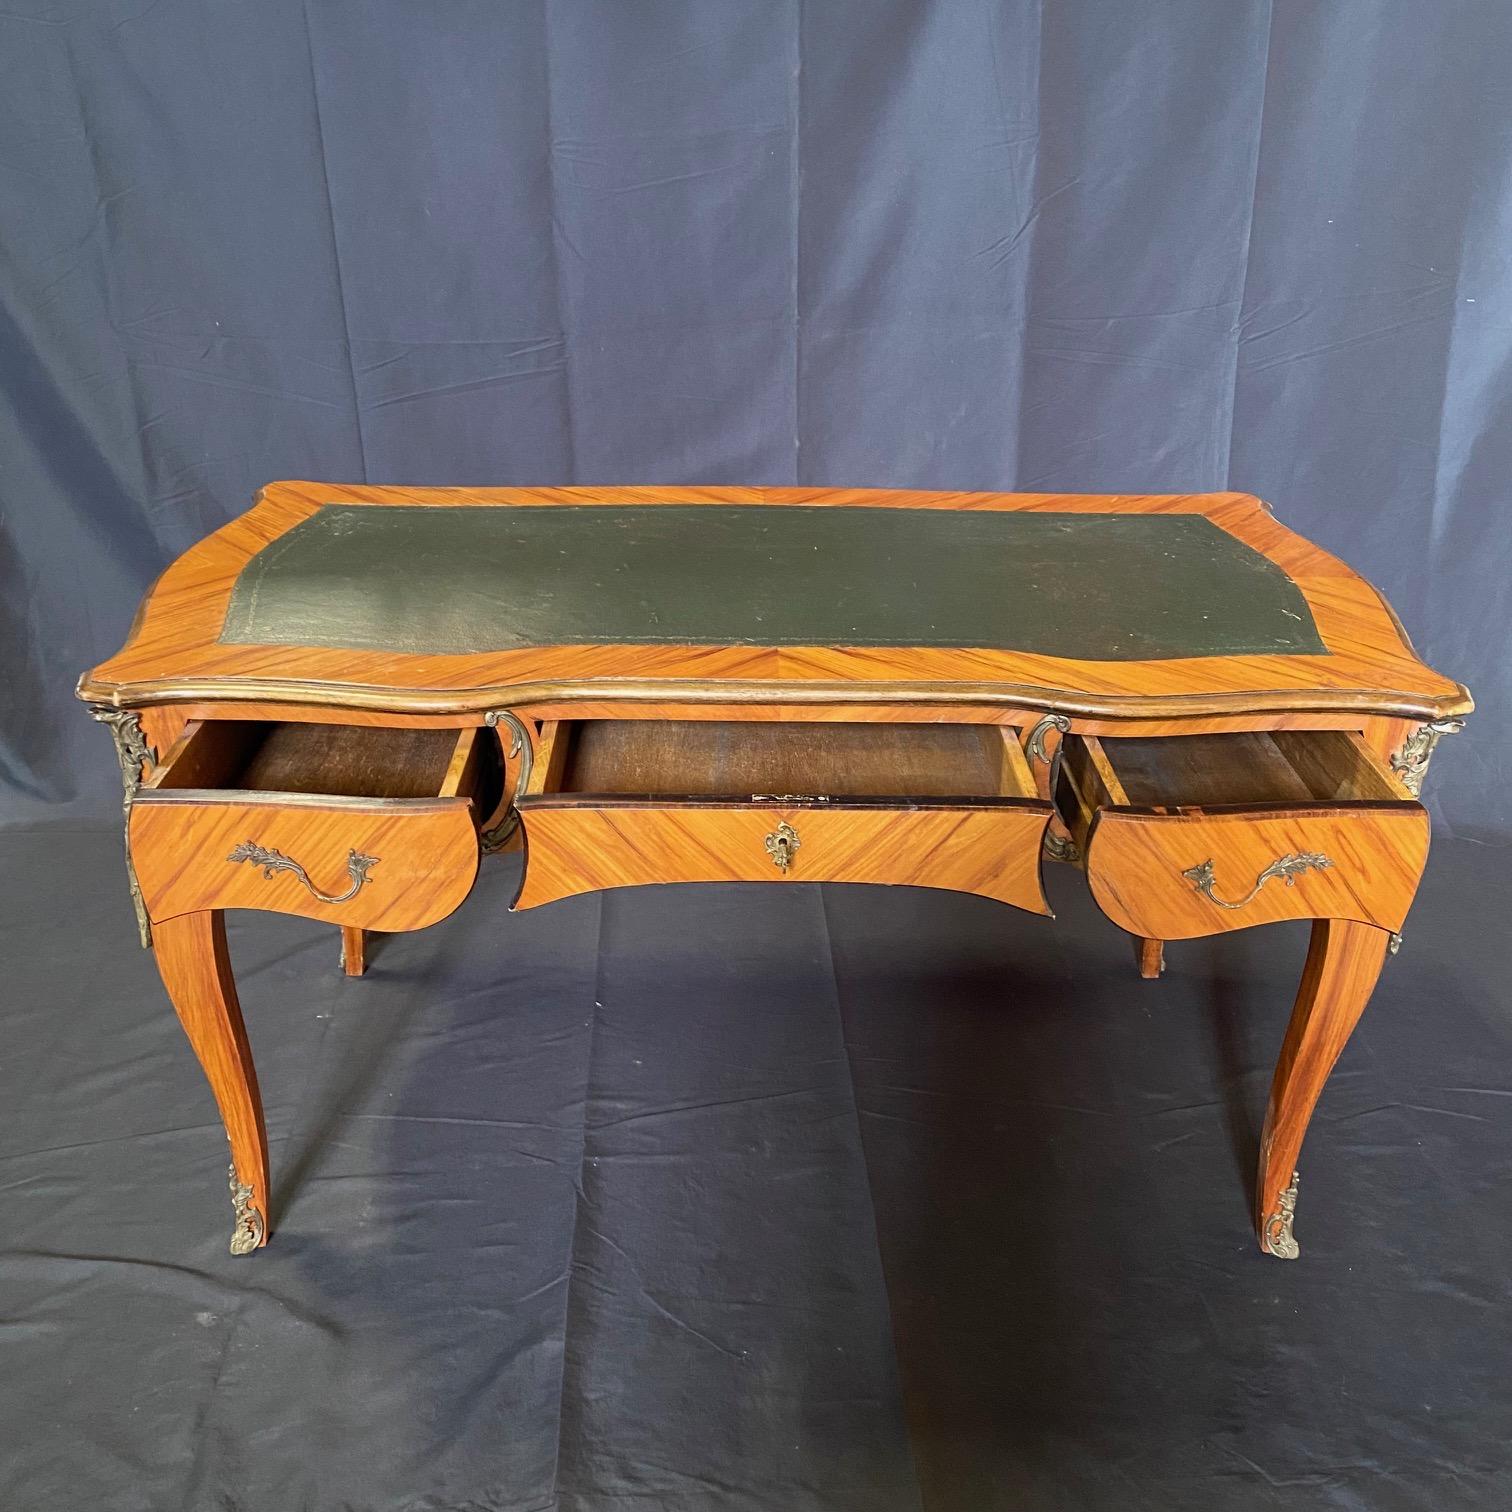 An outstanding French Louis XV desk having embossed leather top and a faux front on its back so will look lovely in the center of any room. The writing desk has three spacious drawers, and is raised on cabriole legs with floral gilt bronze cast